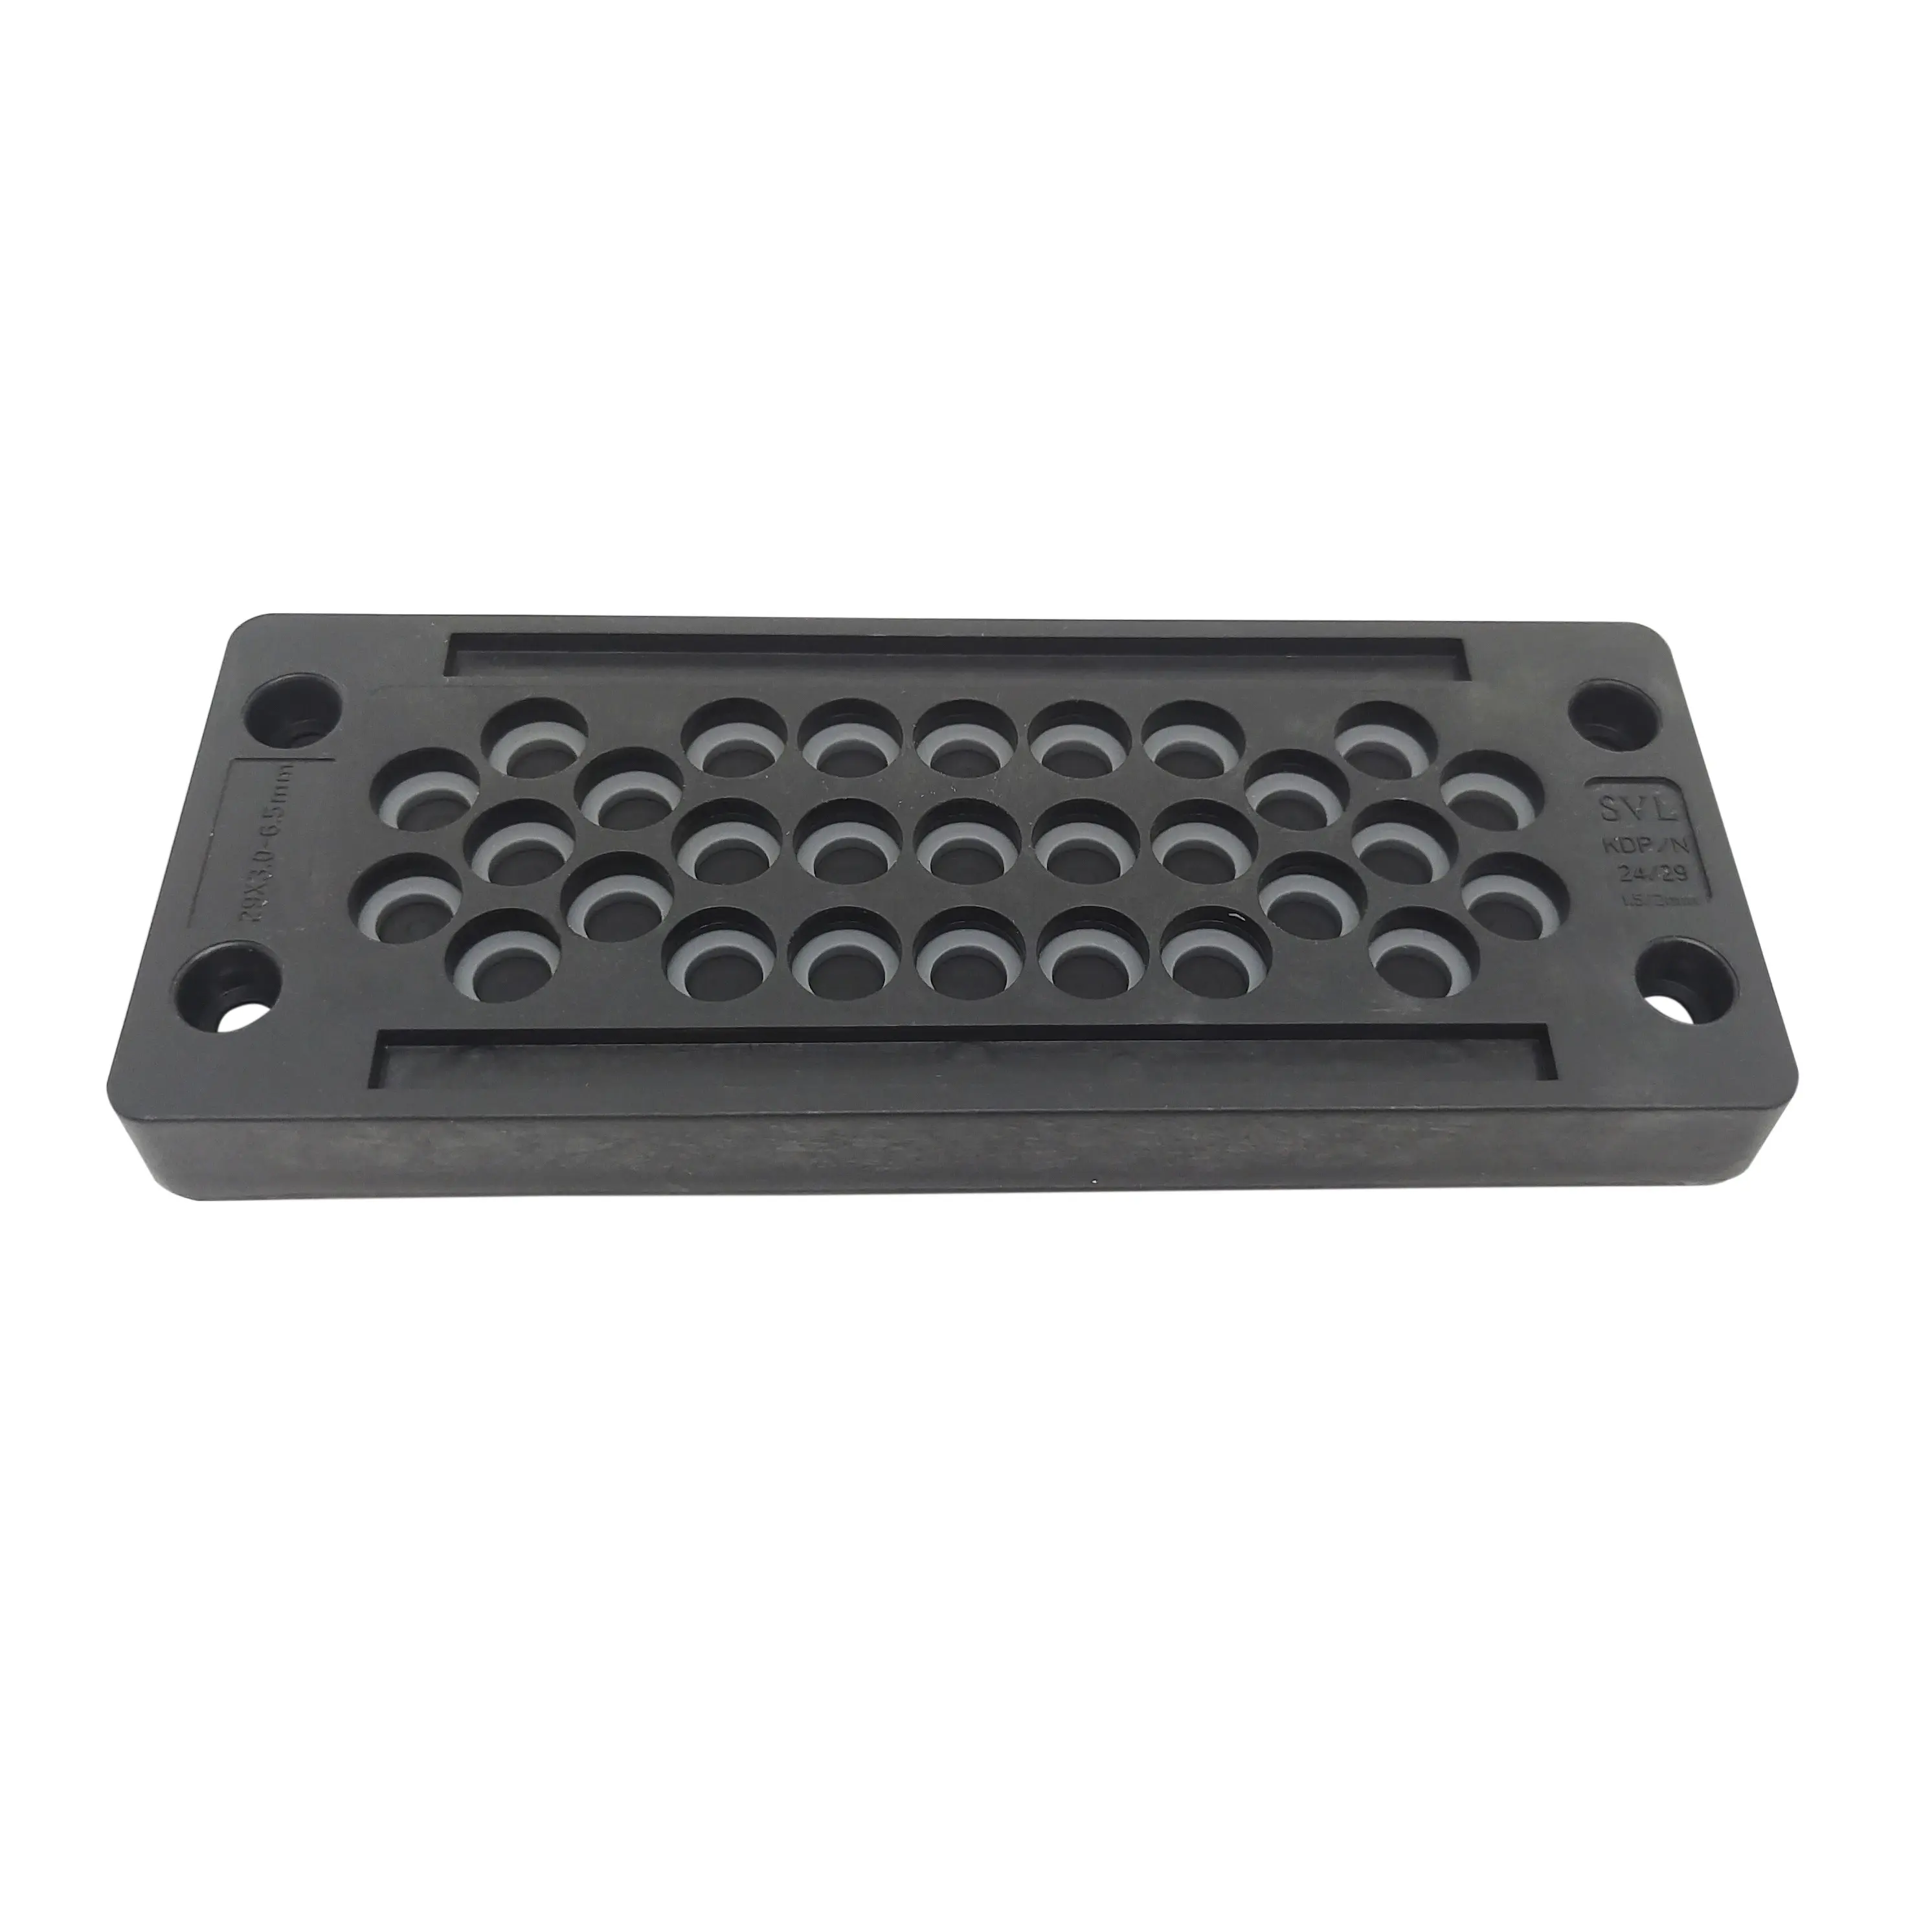 Halogen-free detachable waterproof Multi Cable Transit Frame cable entry plate for electric cabinet